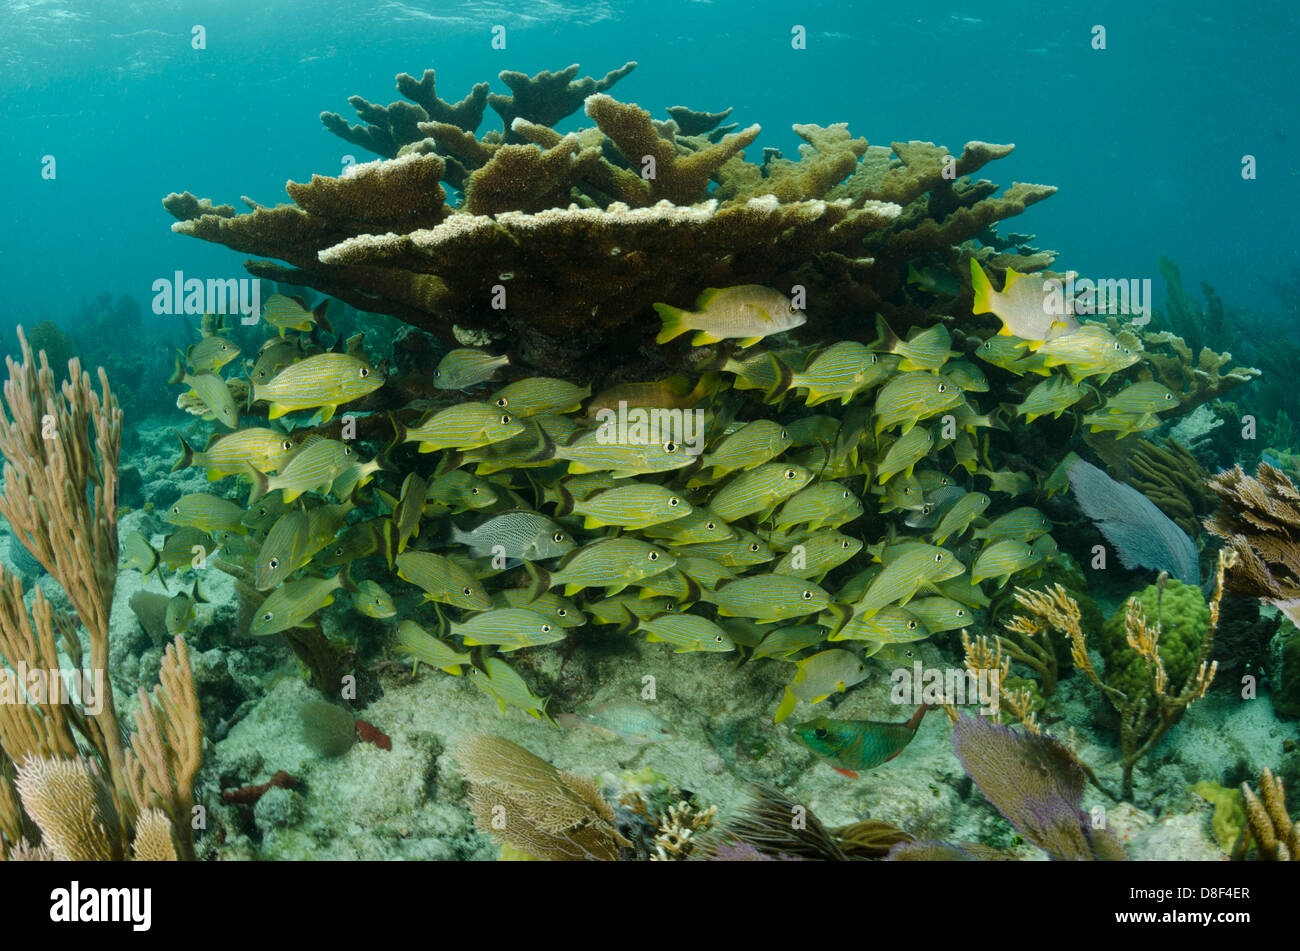 Schooling yellow grunts under a hard coral ledge Stock Photo